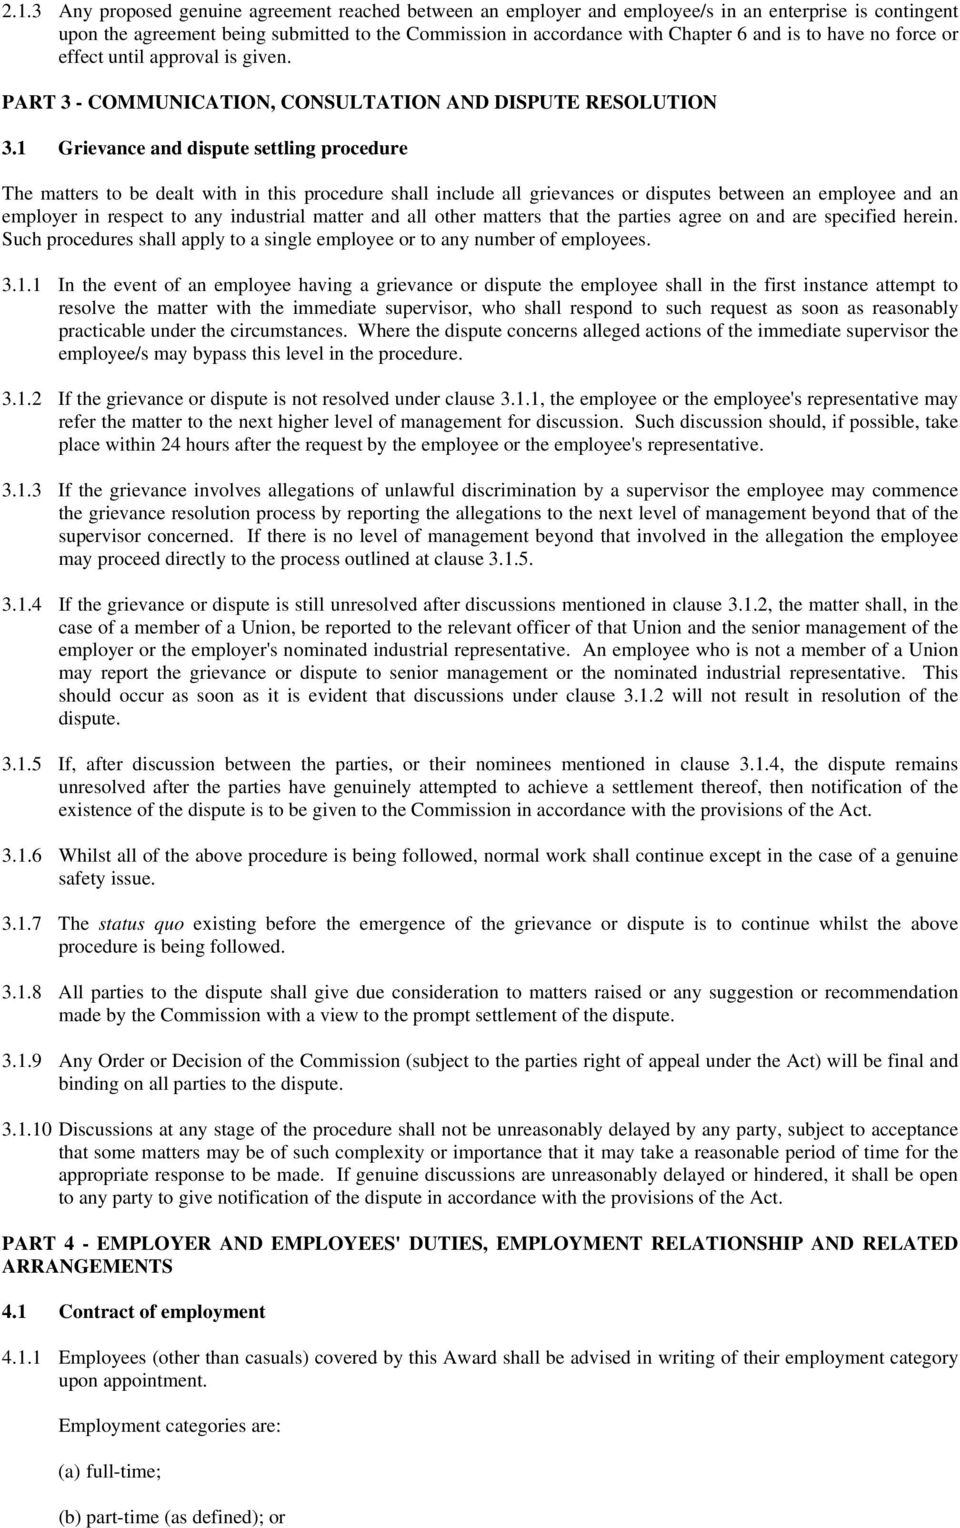 1 Grievance and dispute settling procedure The matters to be dealt with in this procedure shall include all grievances or disputes between an employee and an employer in respect to any industrial